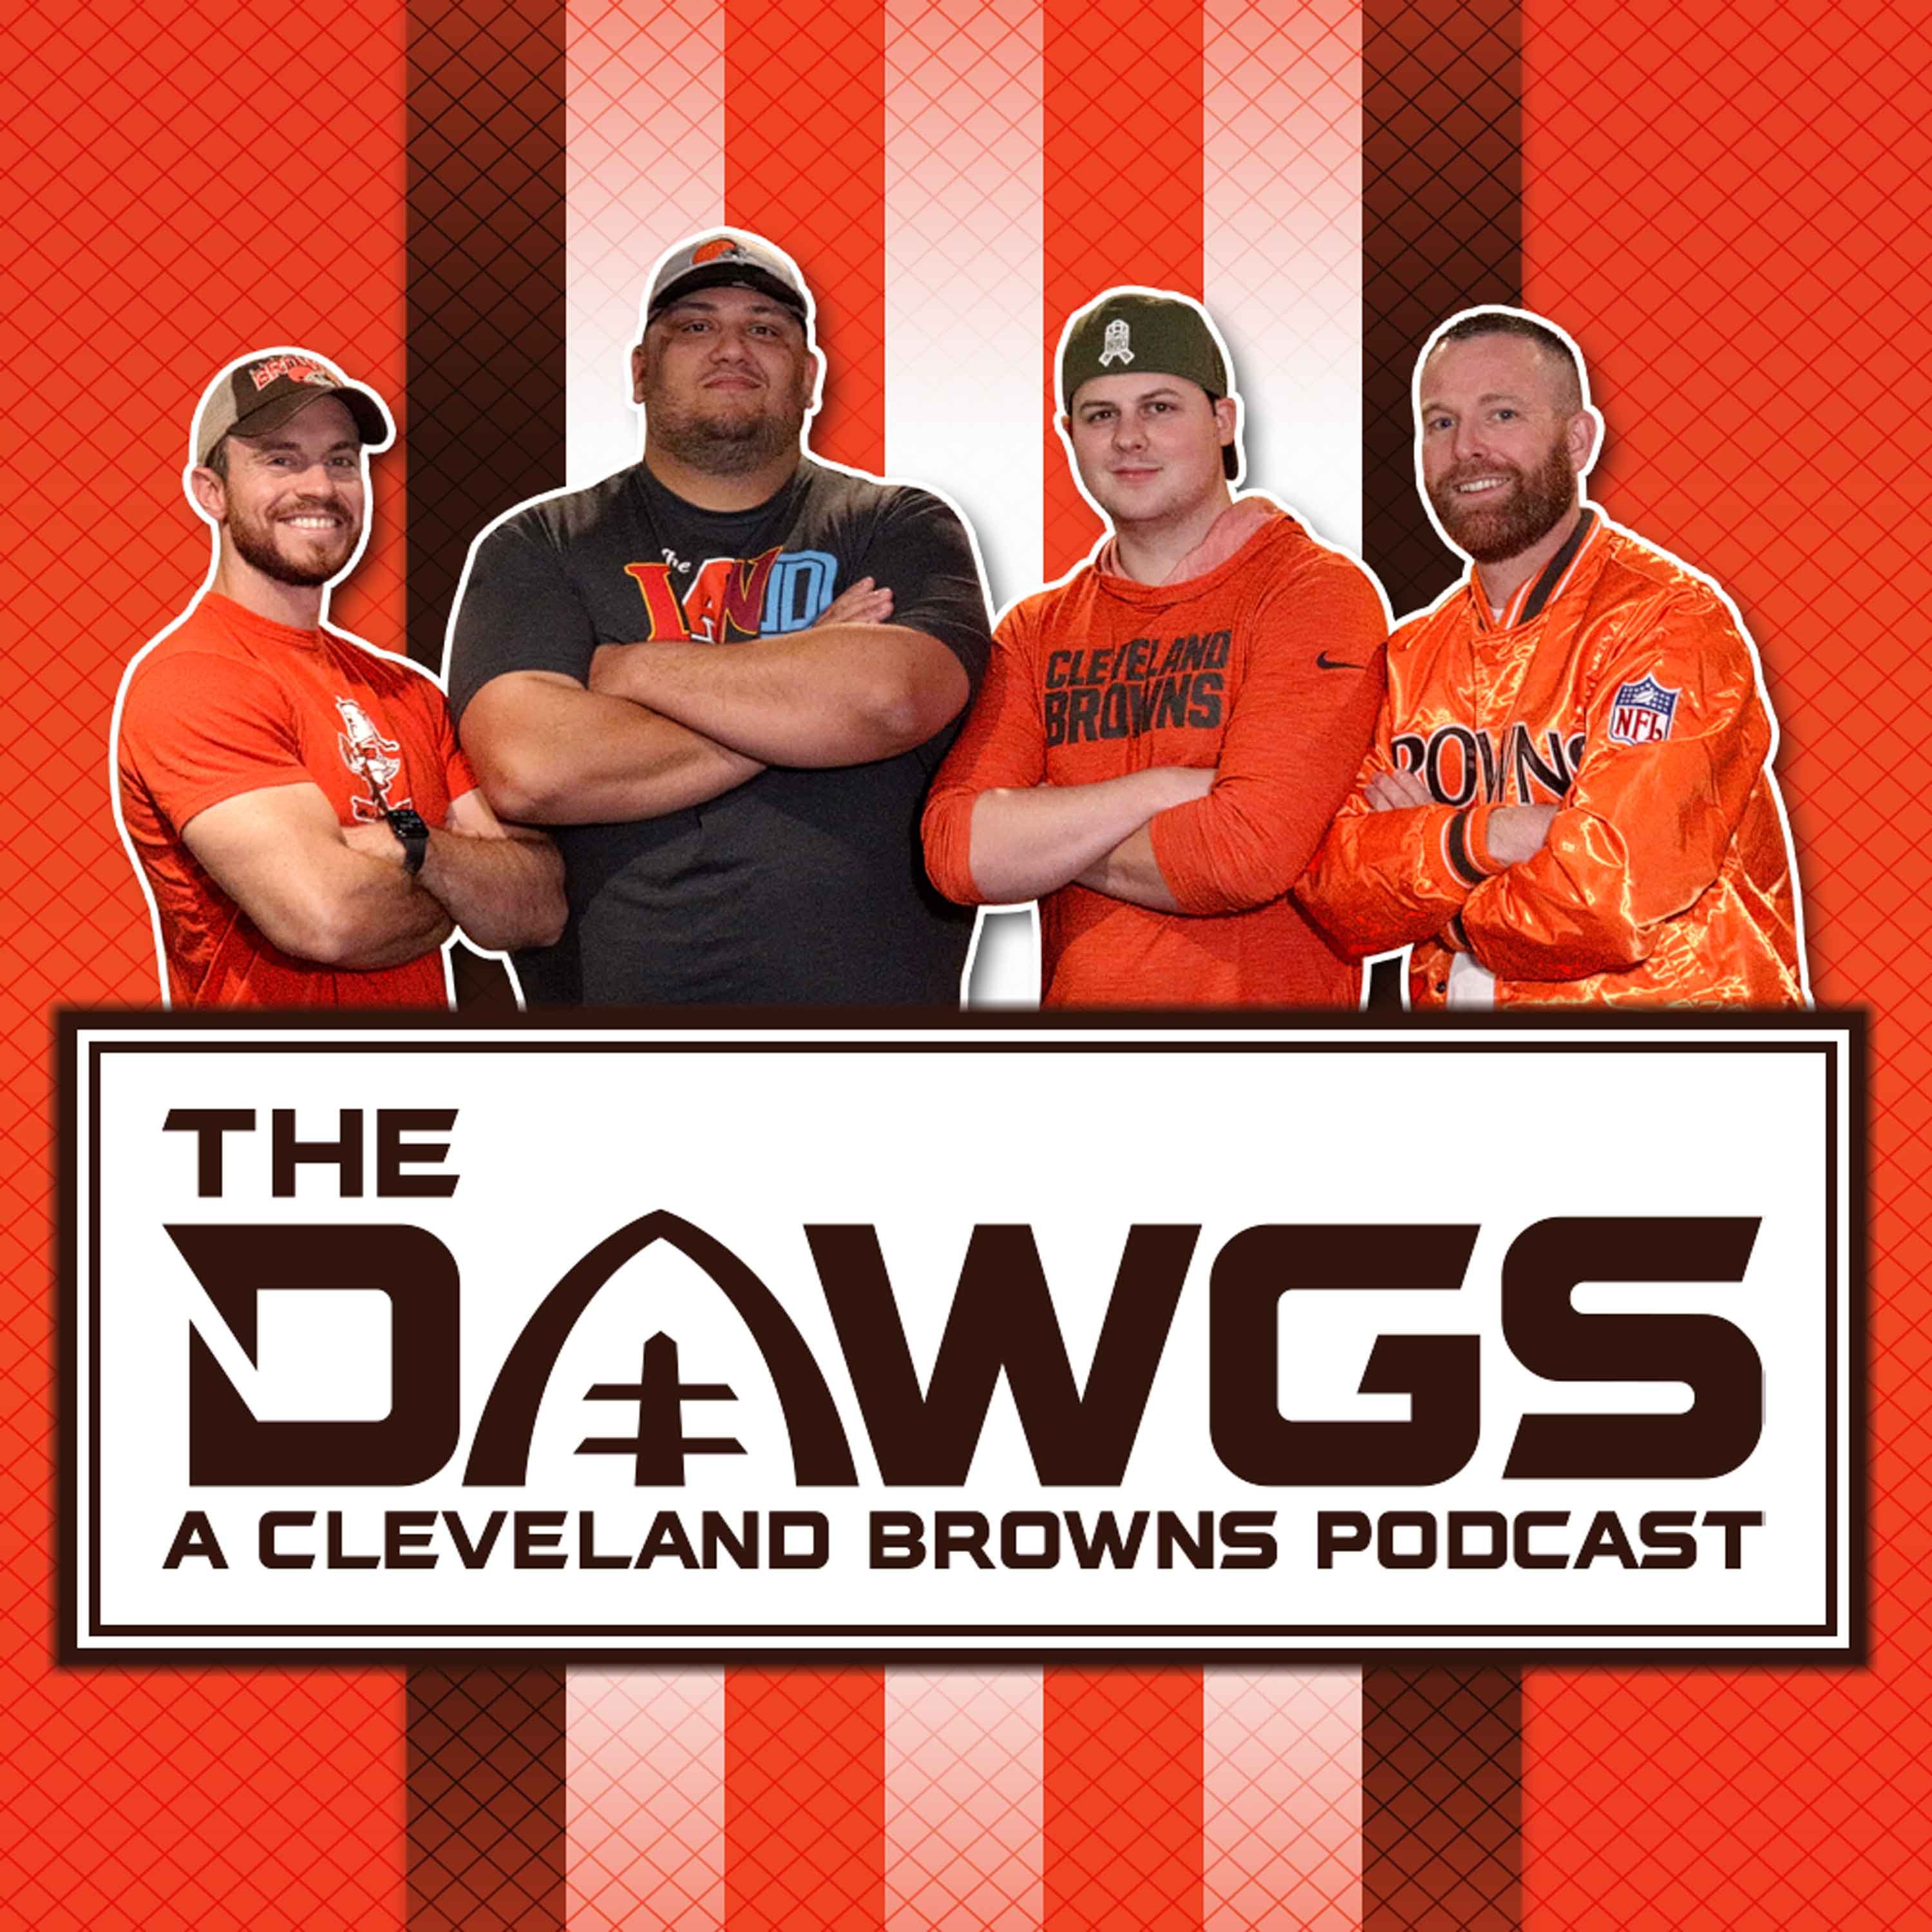 Week 13 LIVE - 2nd Quarter- Cleveland Browns at Houston Texans  | The Dawgs - A Cleveland Browns Podcast - December 4, 2022